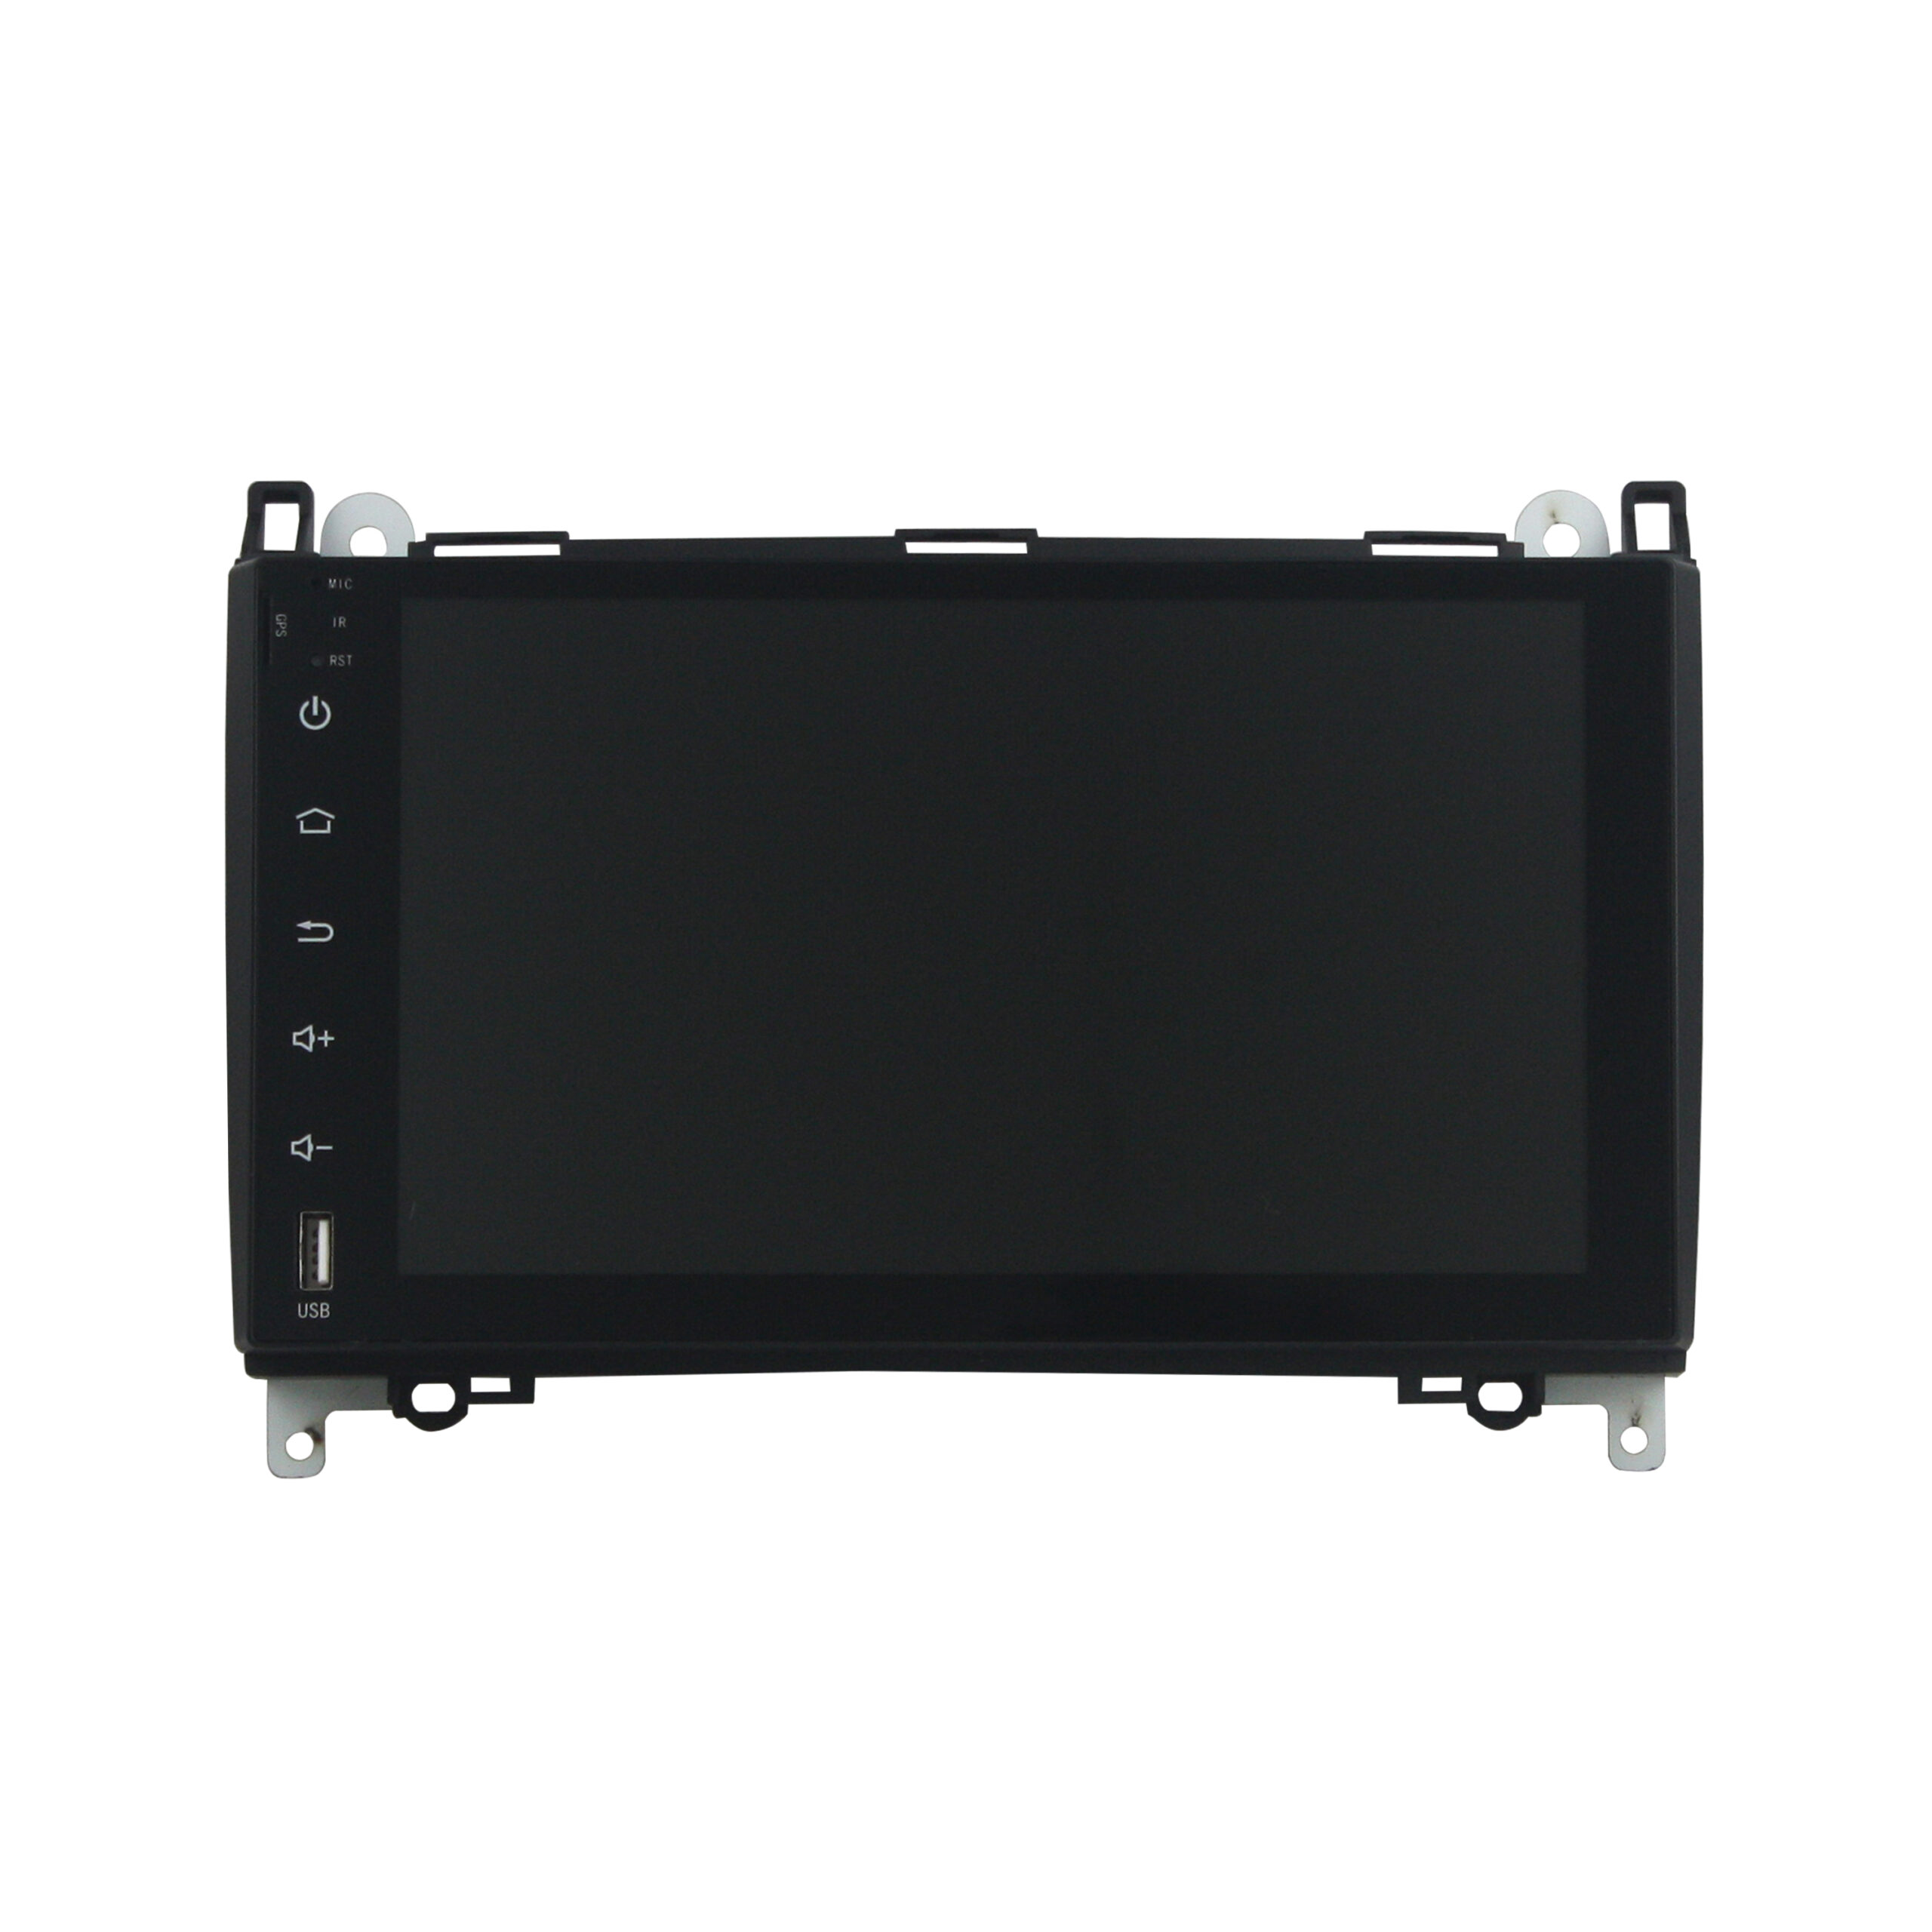 KD-9011 Car Navigation auto radio android screen for Benz A-B Class